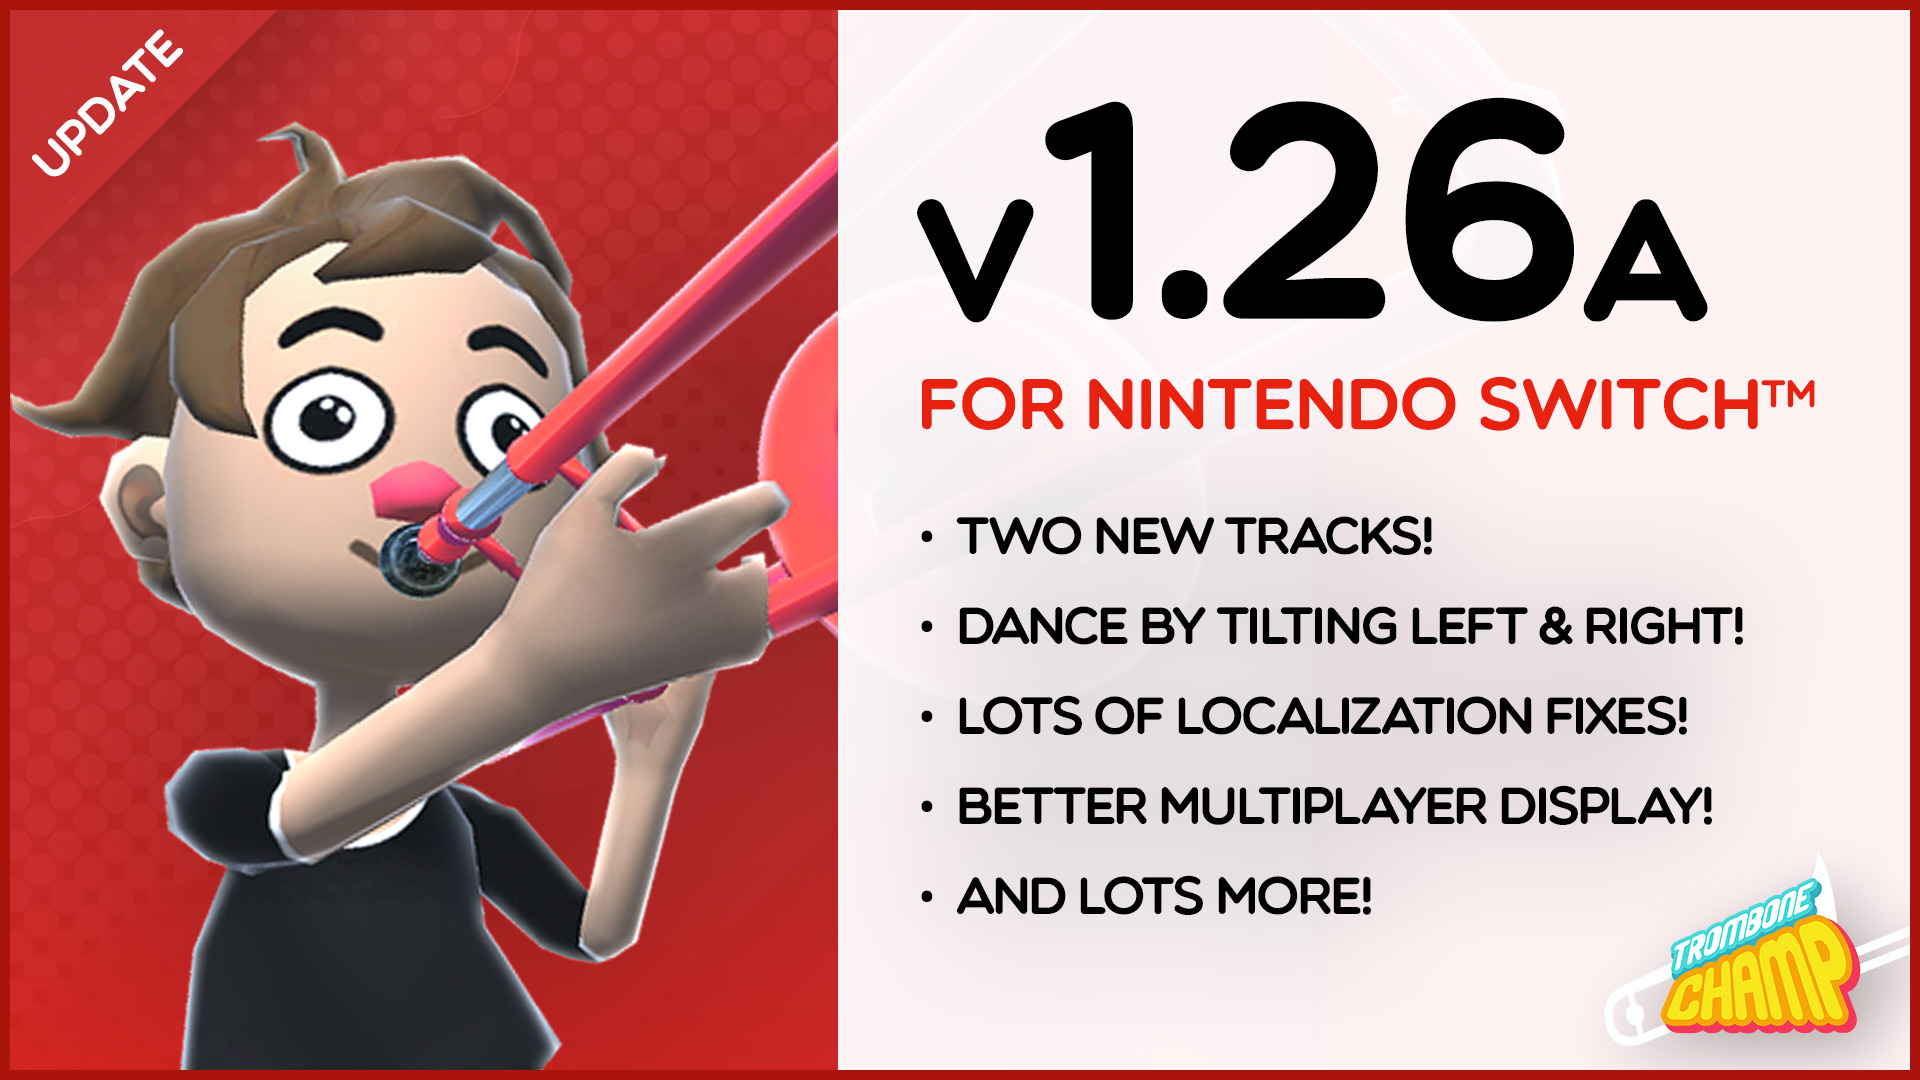 Trombone Champ Version 1.26A comes to the Nintendo Switch™!